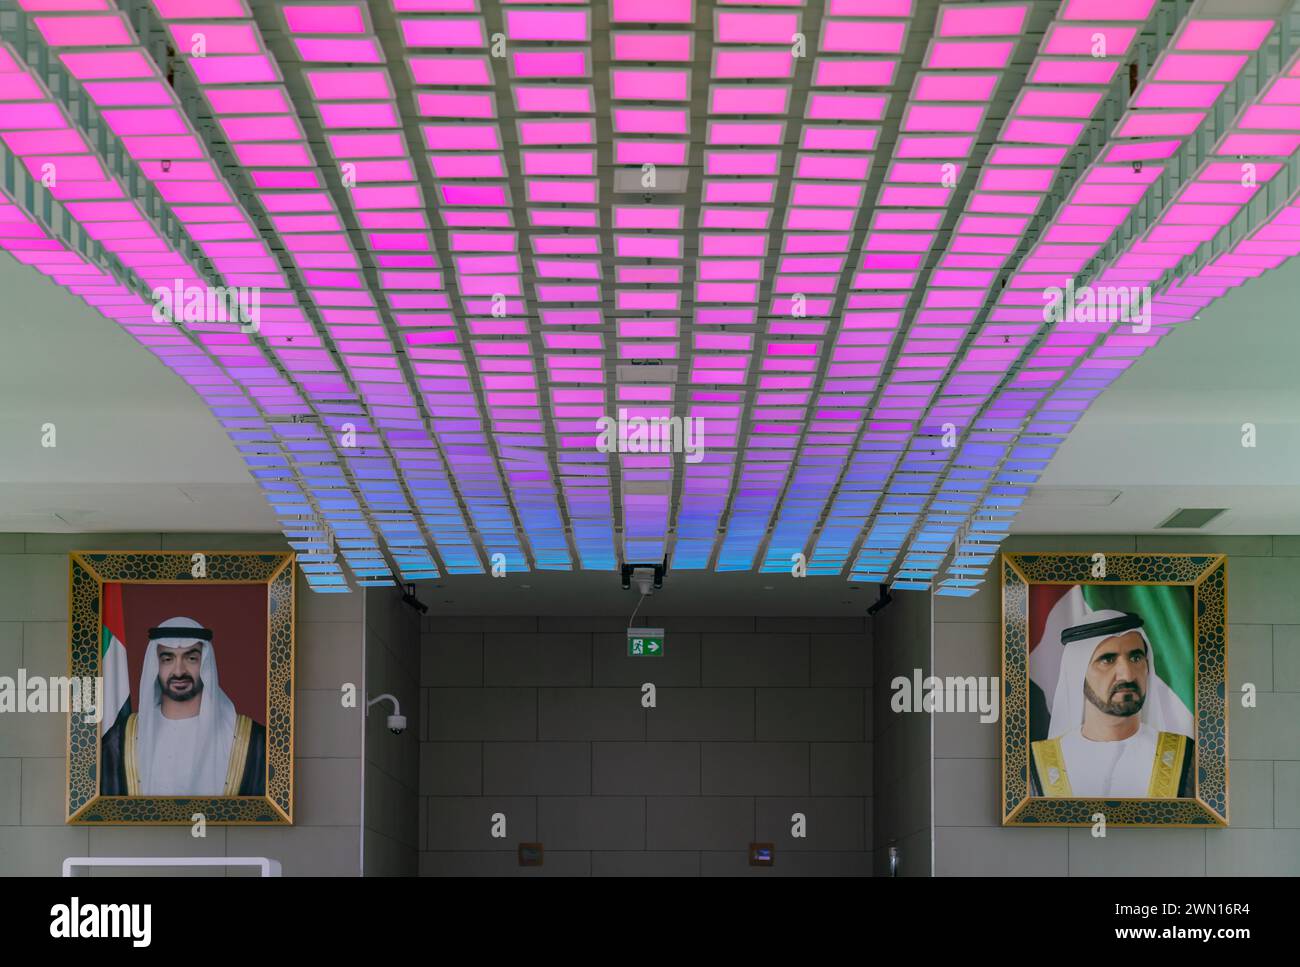 A picture of portraits of the Sheikh Mohammed bin Rashid Al Maktoum and the Sheikh Mohammed bin Zayed Al Nahyan inside the Dubai Frame. Stock Photo